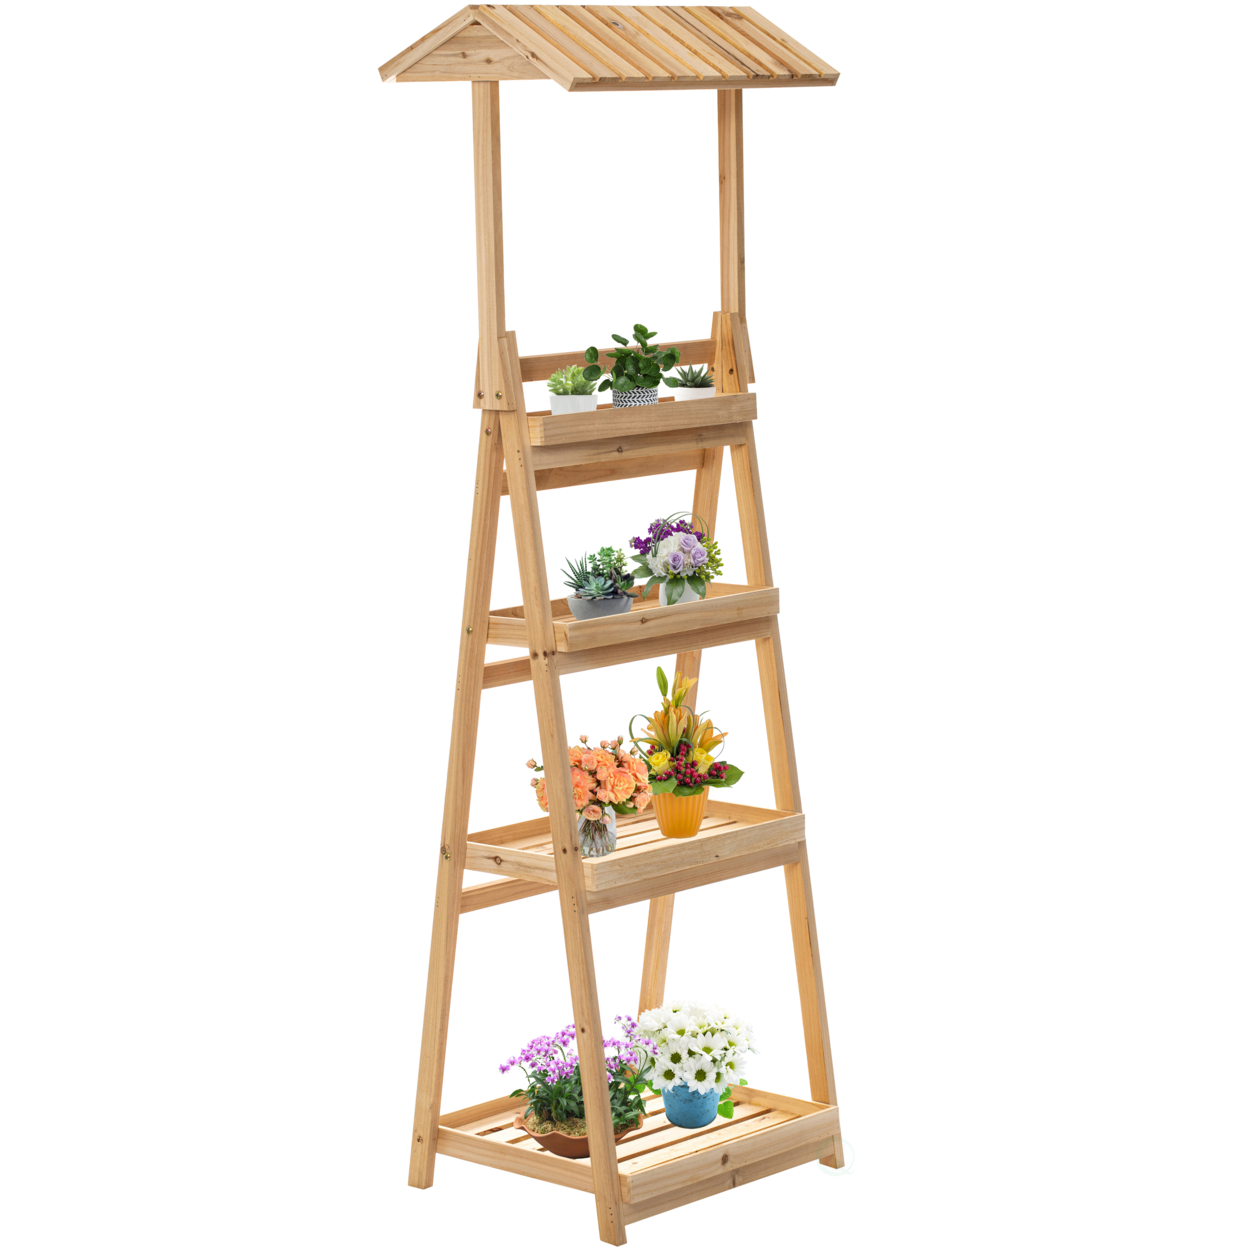 Small Slim Narrow Wooden Shelf Stand Cart Plant Shelf With Artistic Roof Design Will Add A Touch Of Rustic Elegance To Your Home Plant Stand